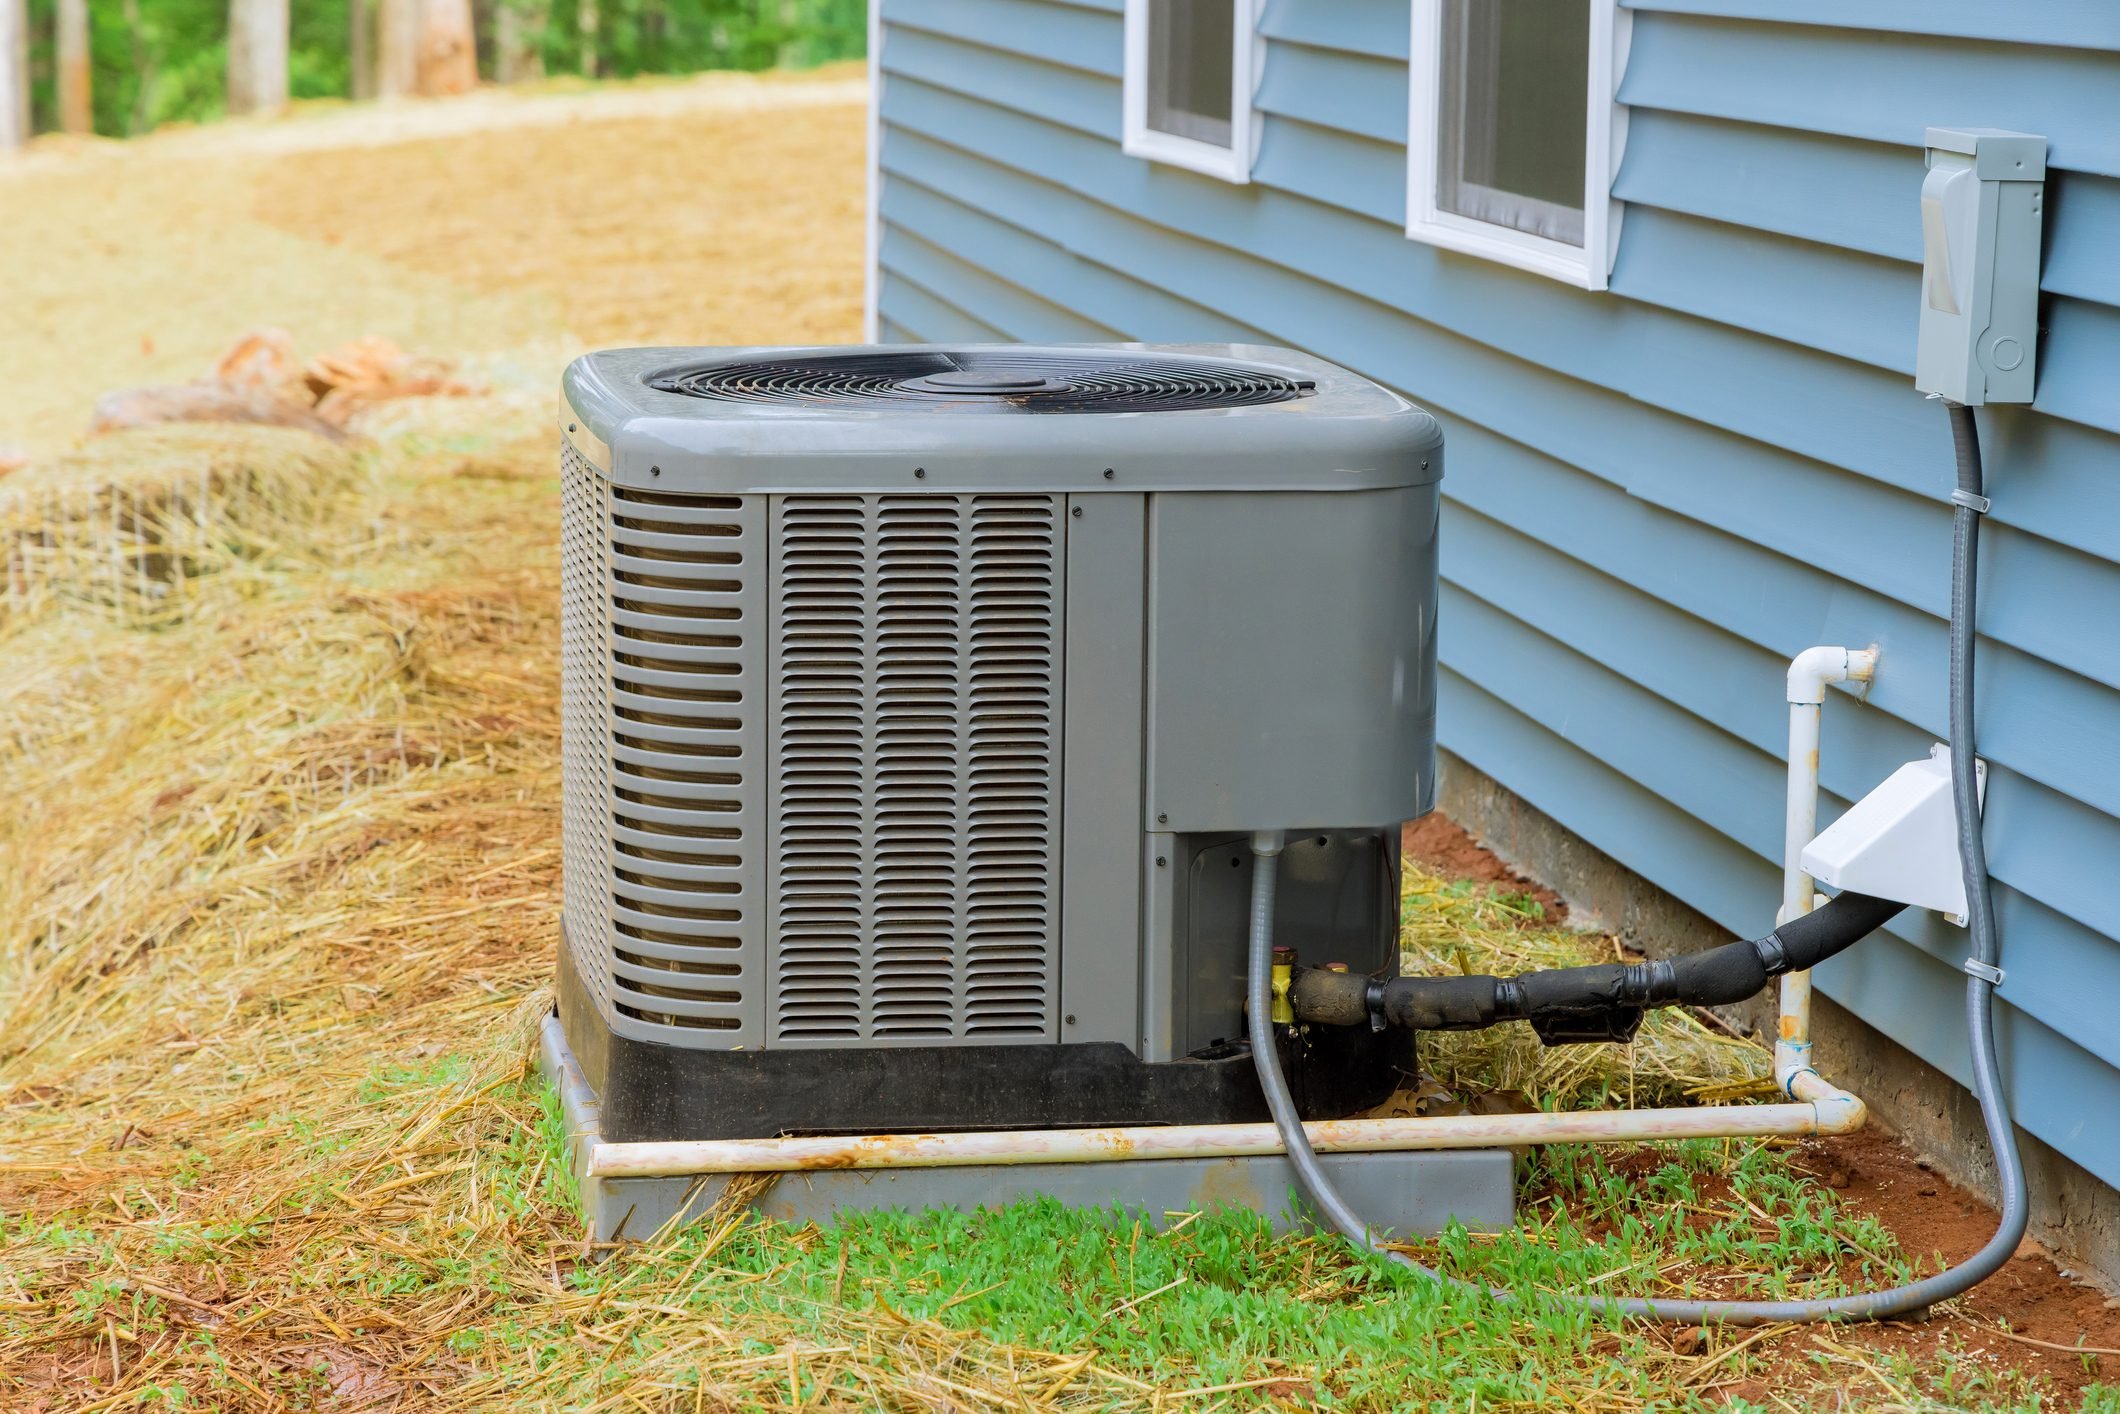 New HVAC System Cost How Much Is It? Family Handyman